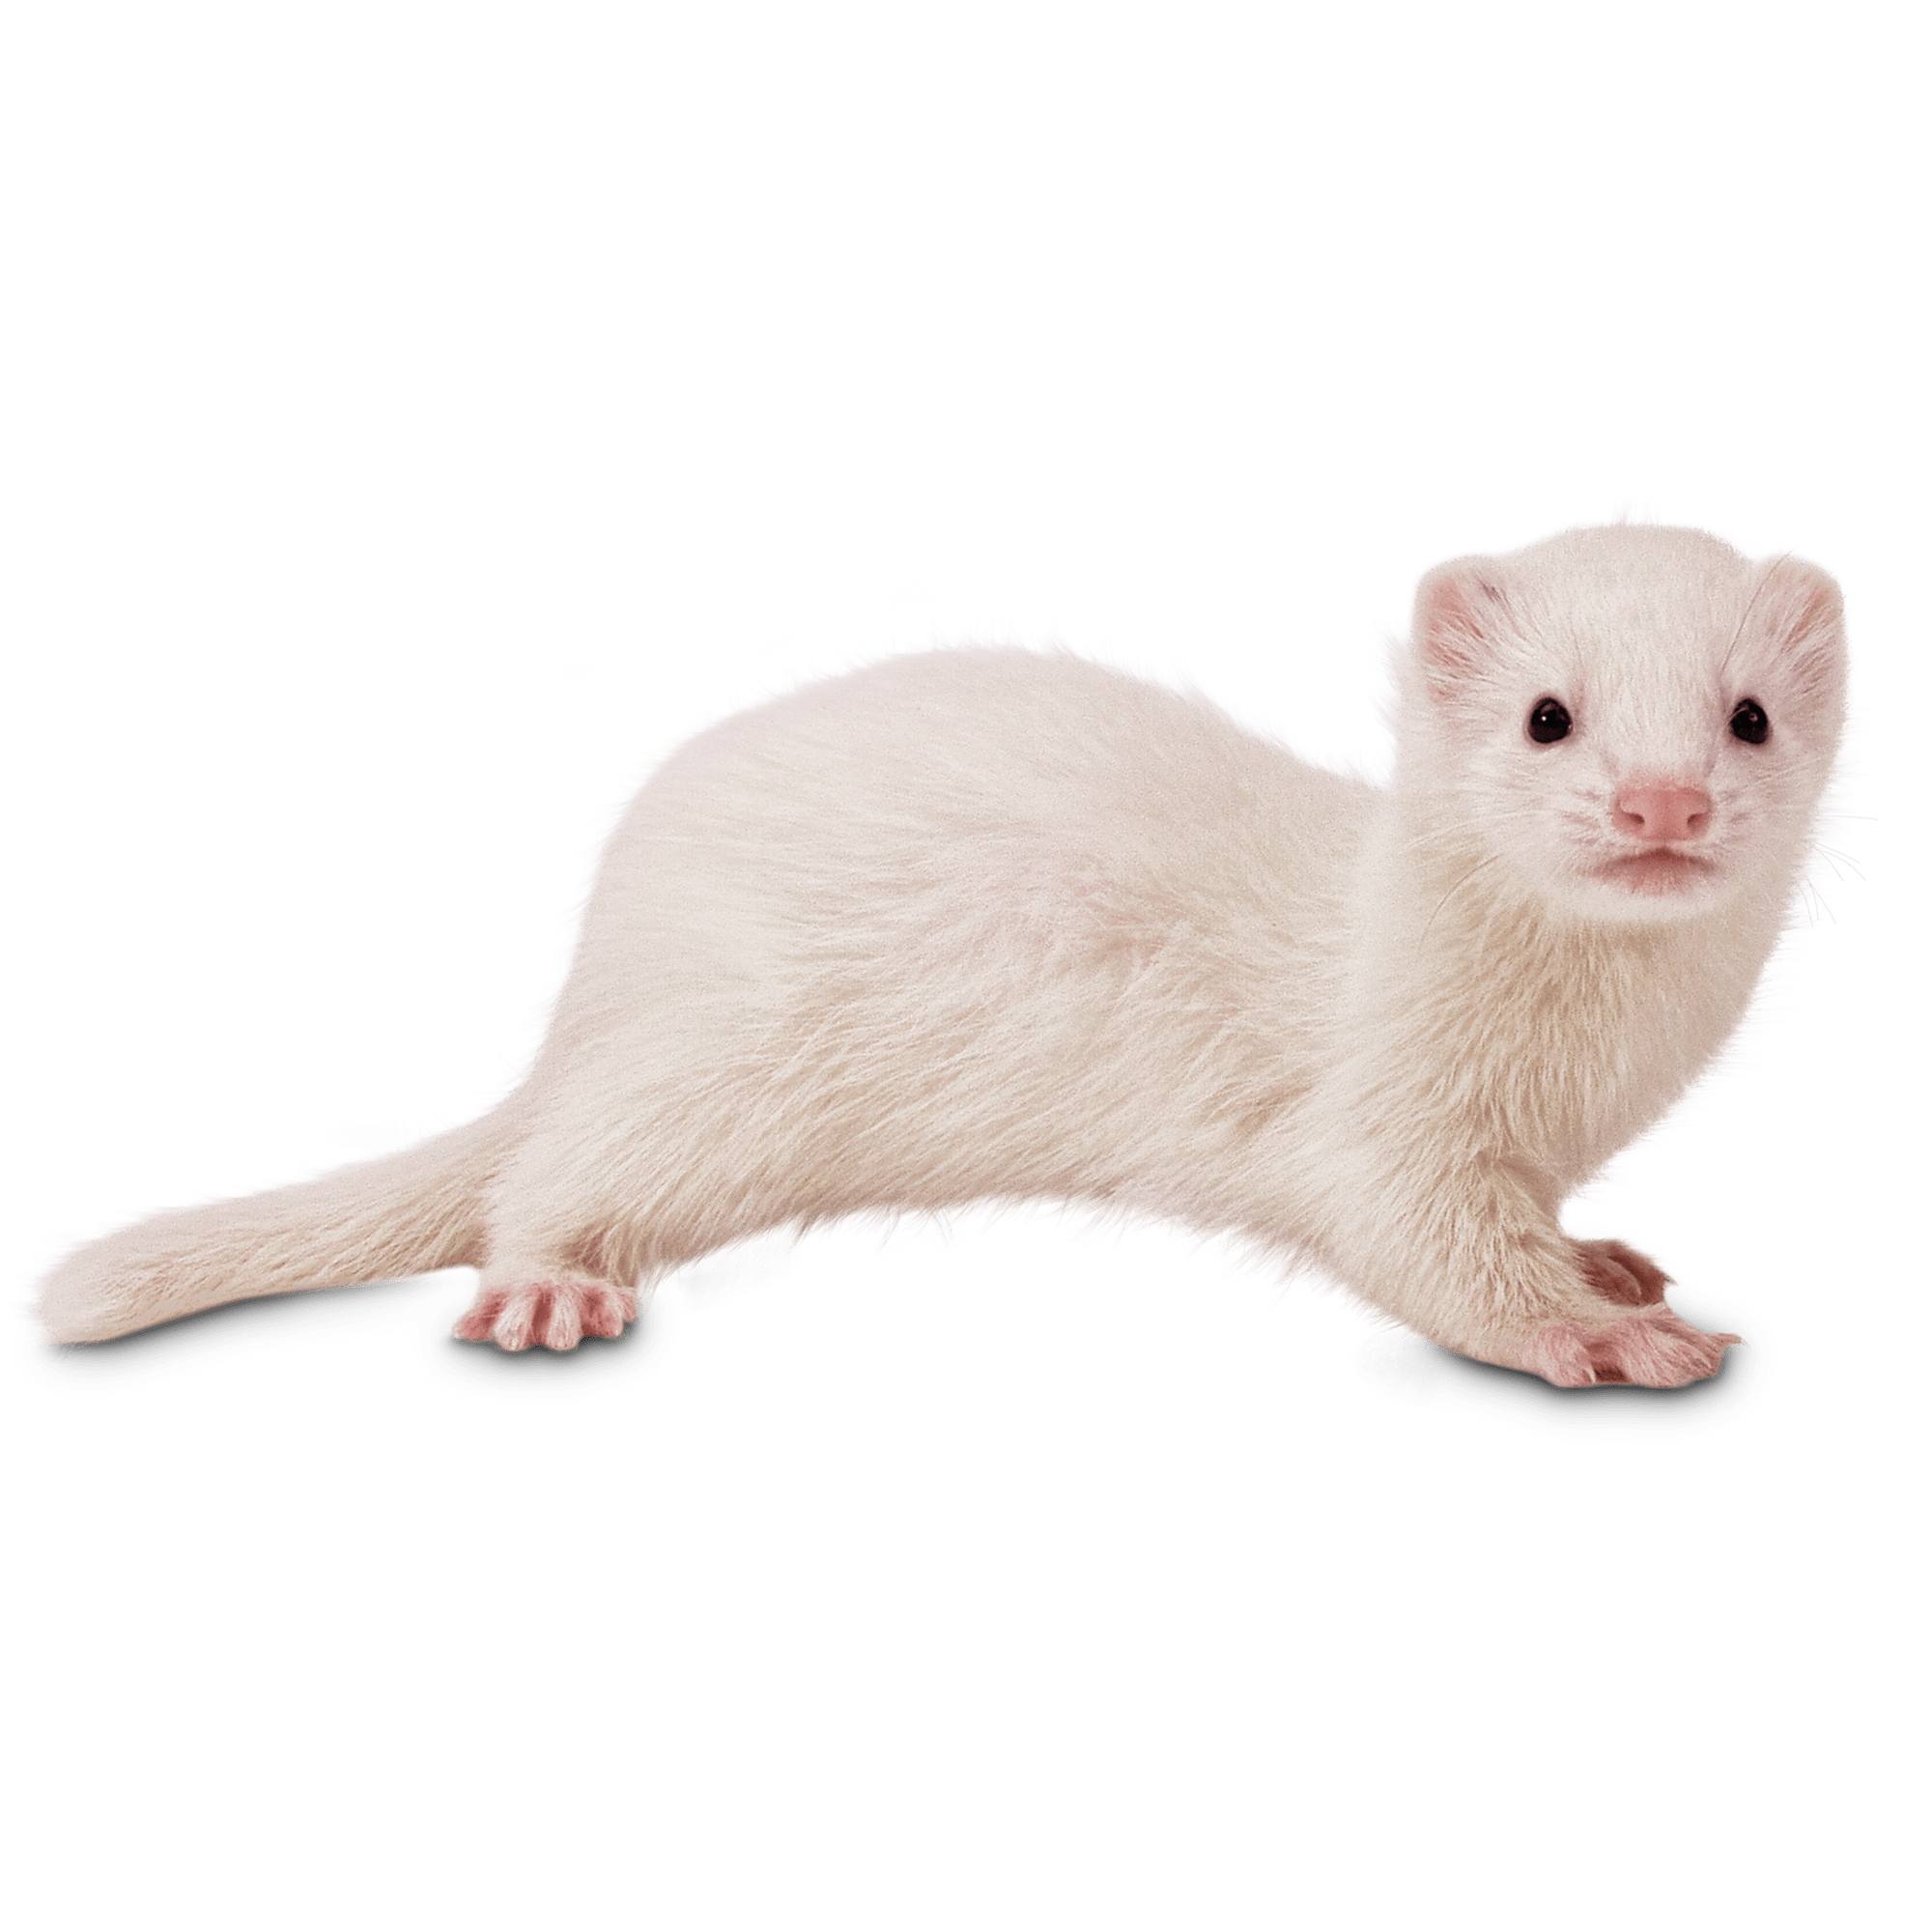 Ferrets for Sale: Live Pet Ferrets for Sale | Petco